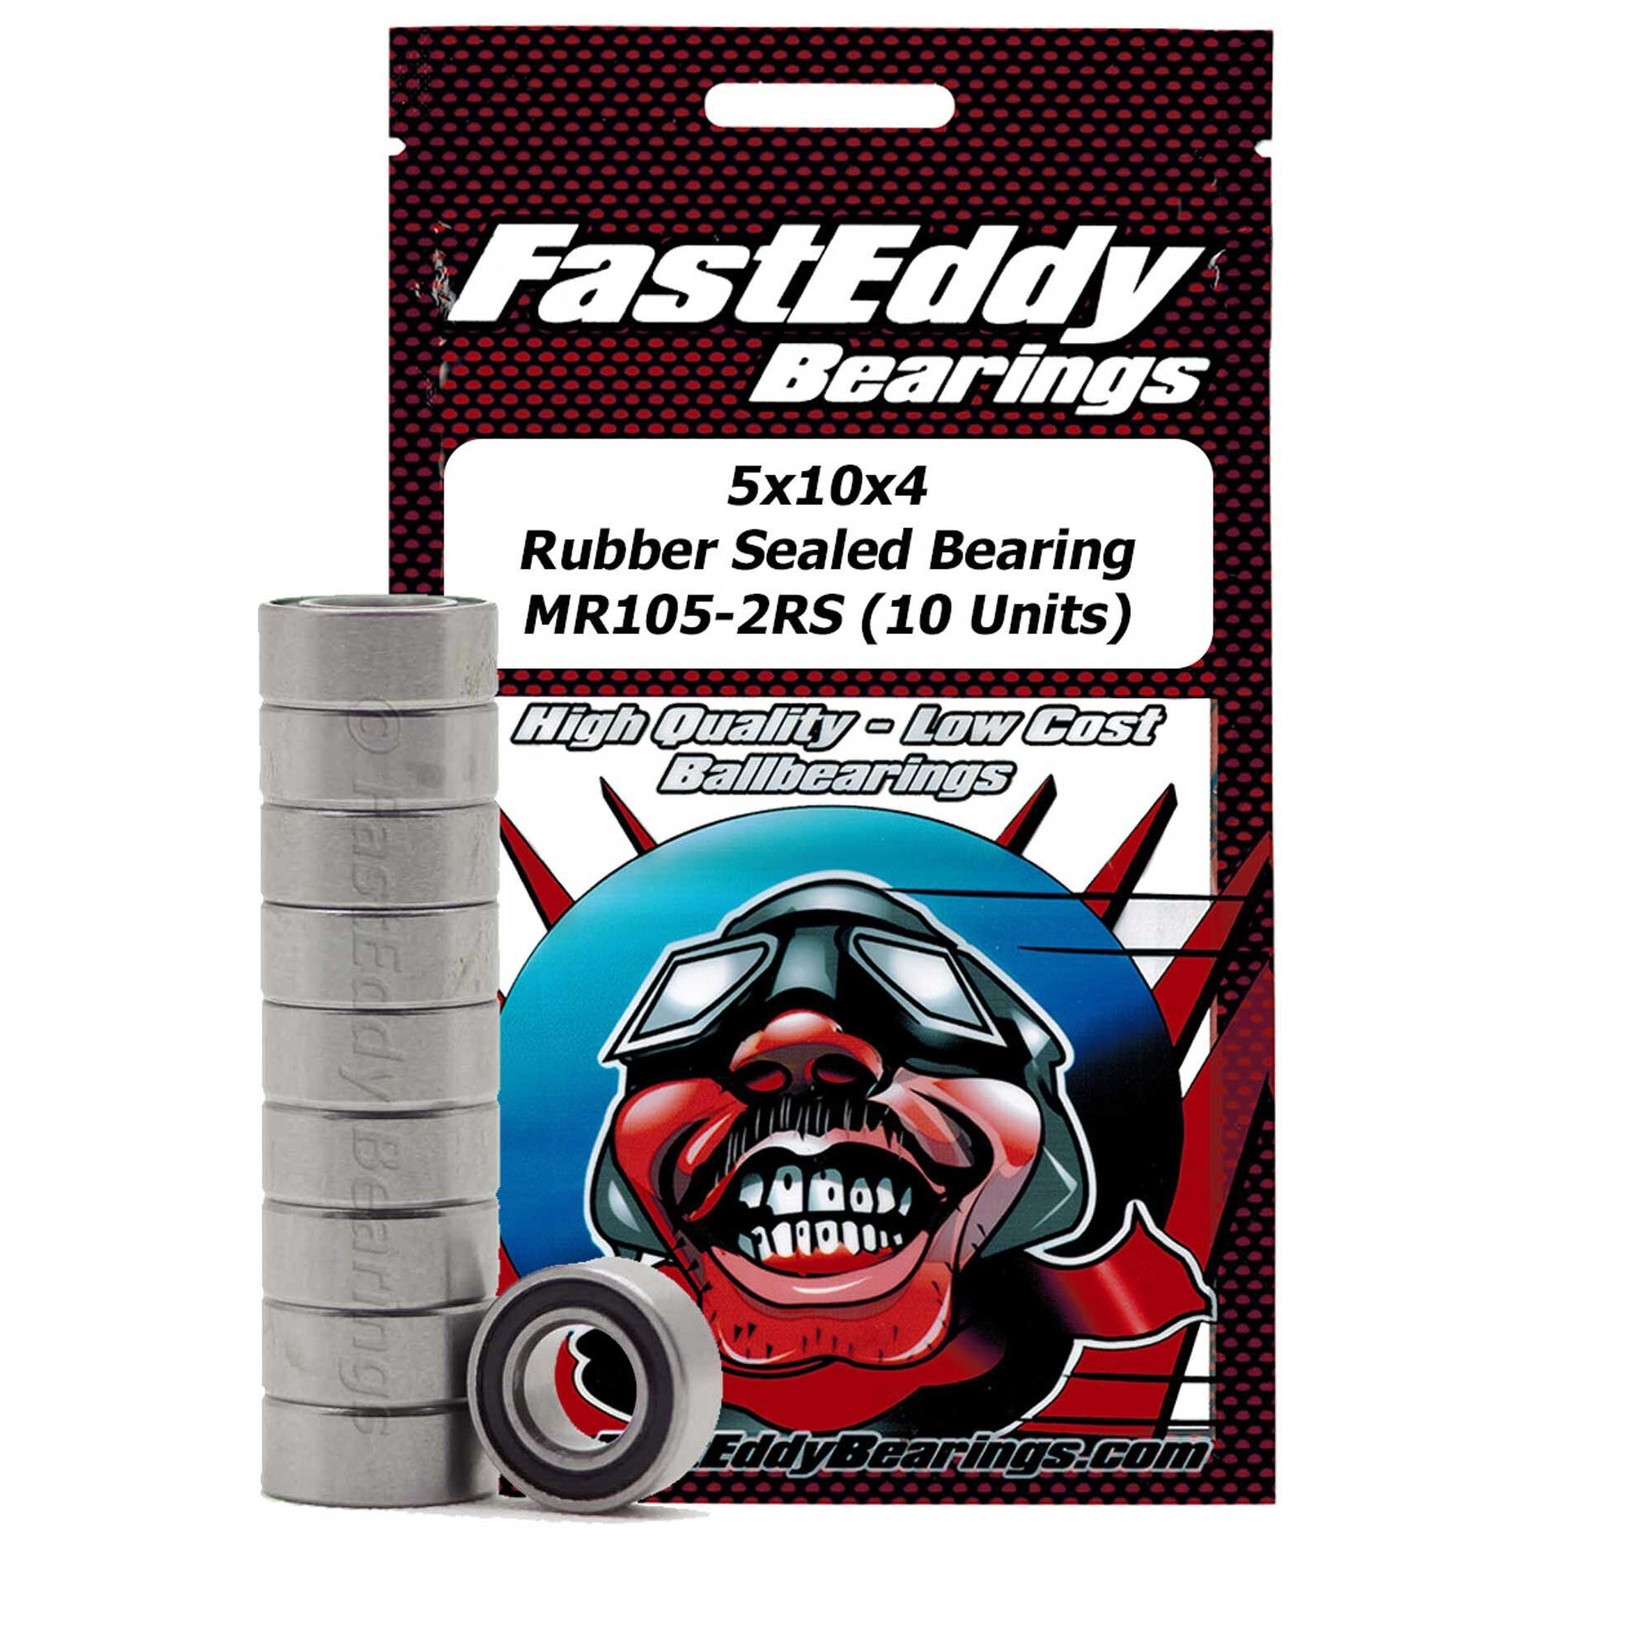 Fast Eddy 5x10x4 Rubber Sealed Bearing, MR105-2RS